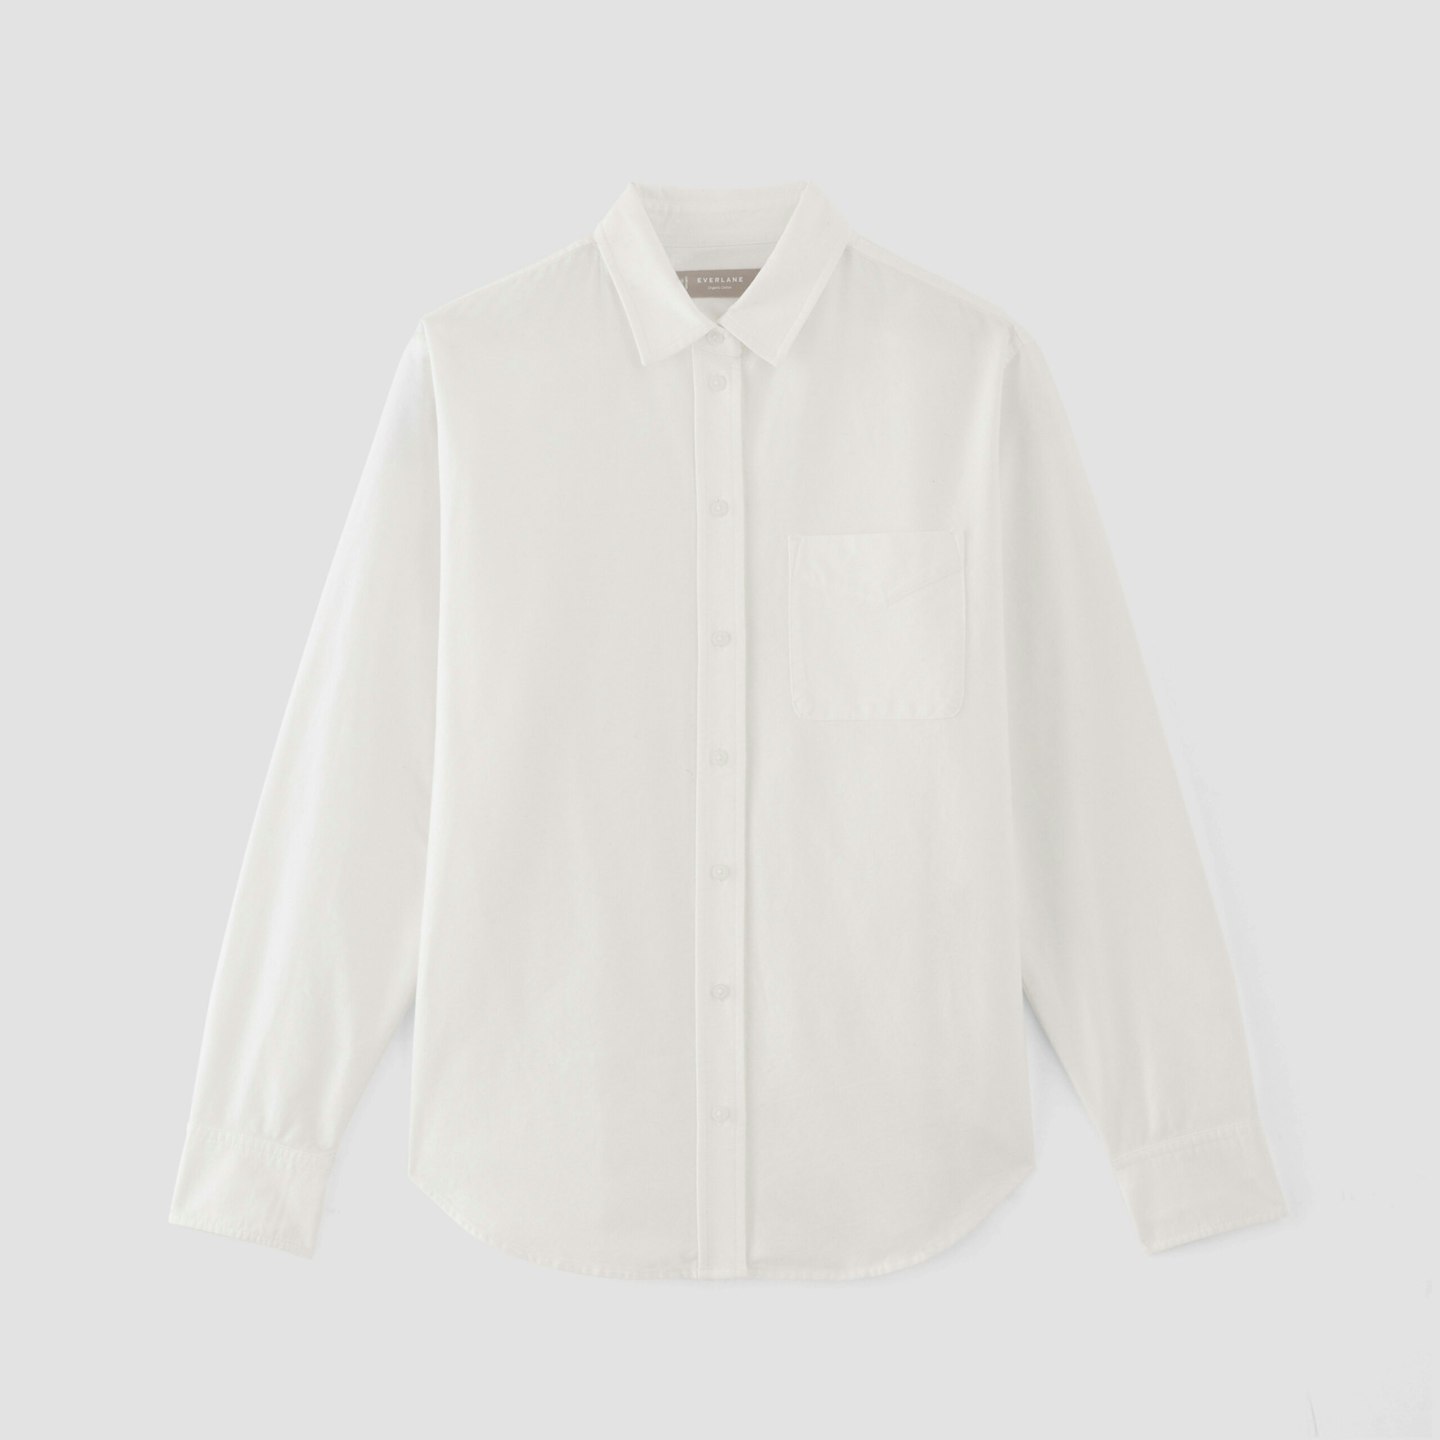 Everlane, The Relaxed Oxford Shirt